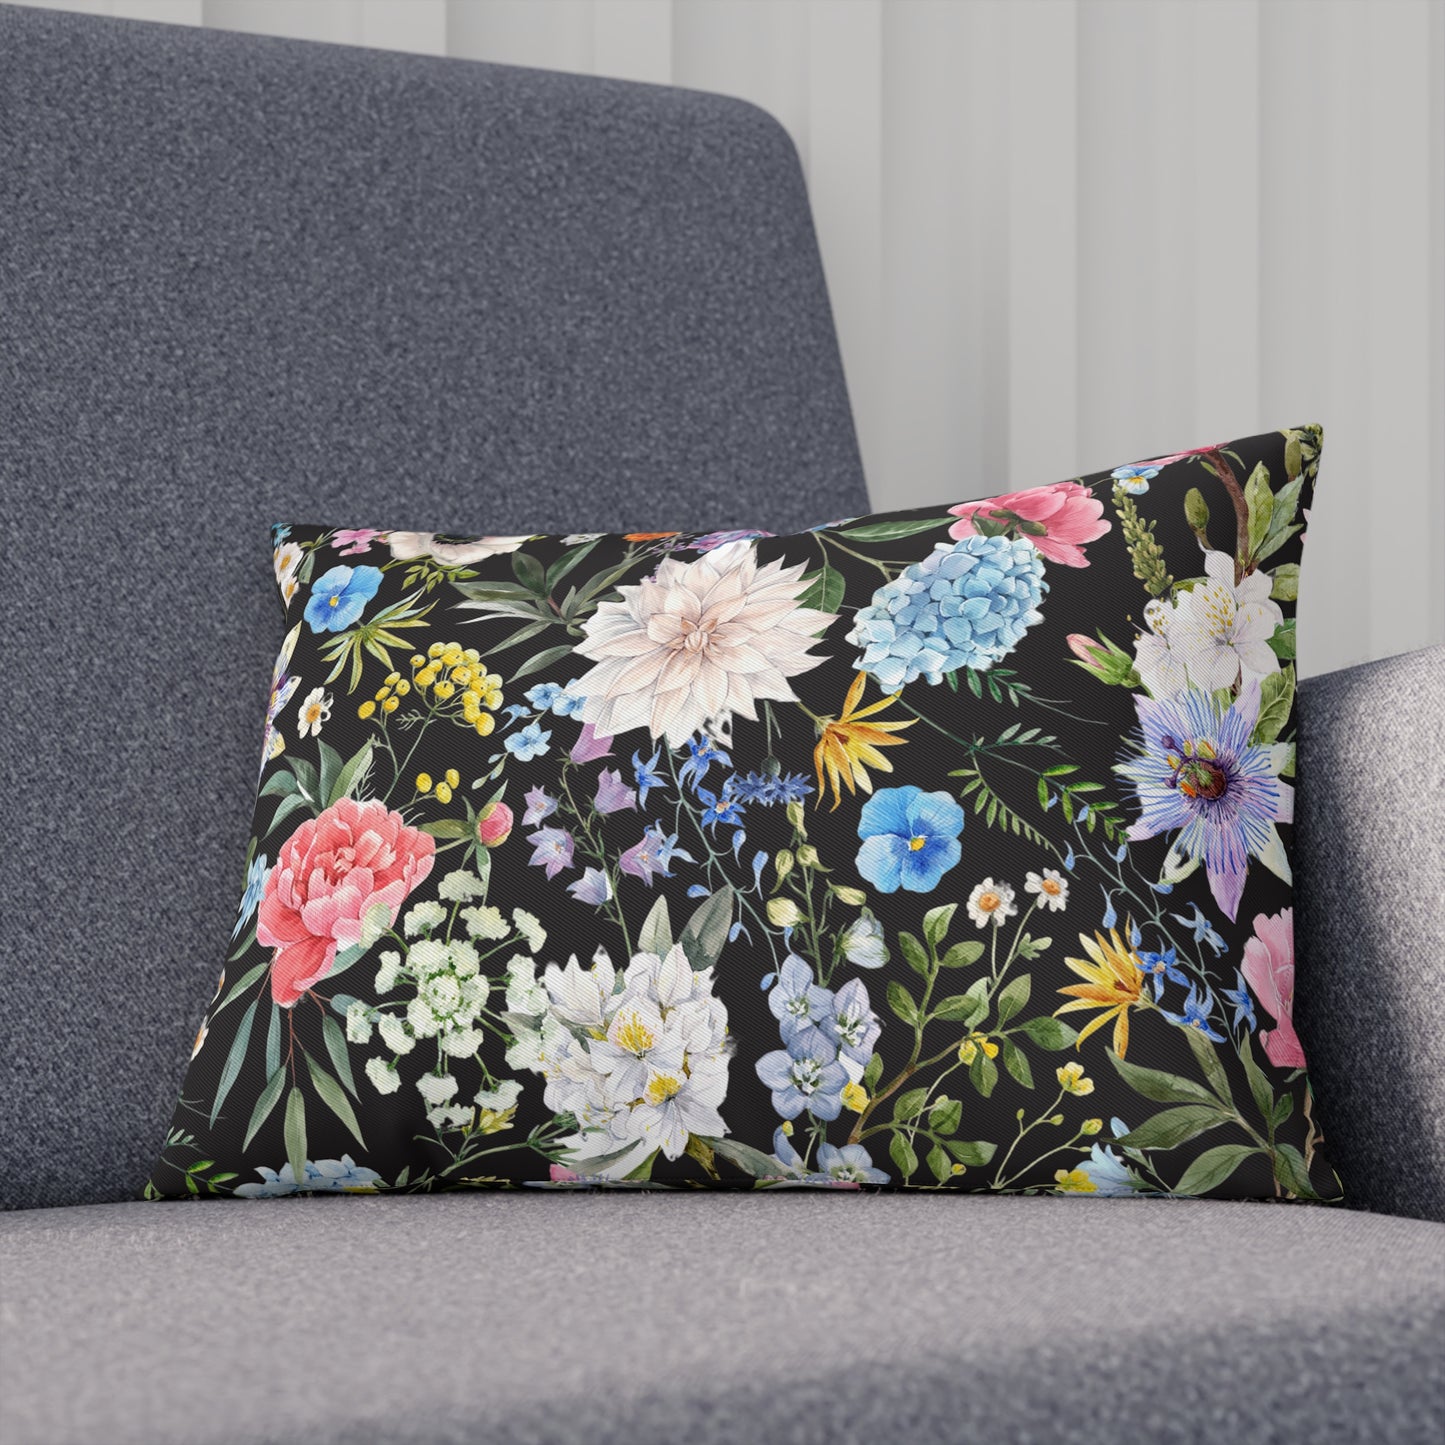 Floral Blooms Black Setting Cushion